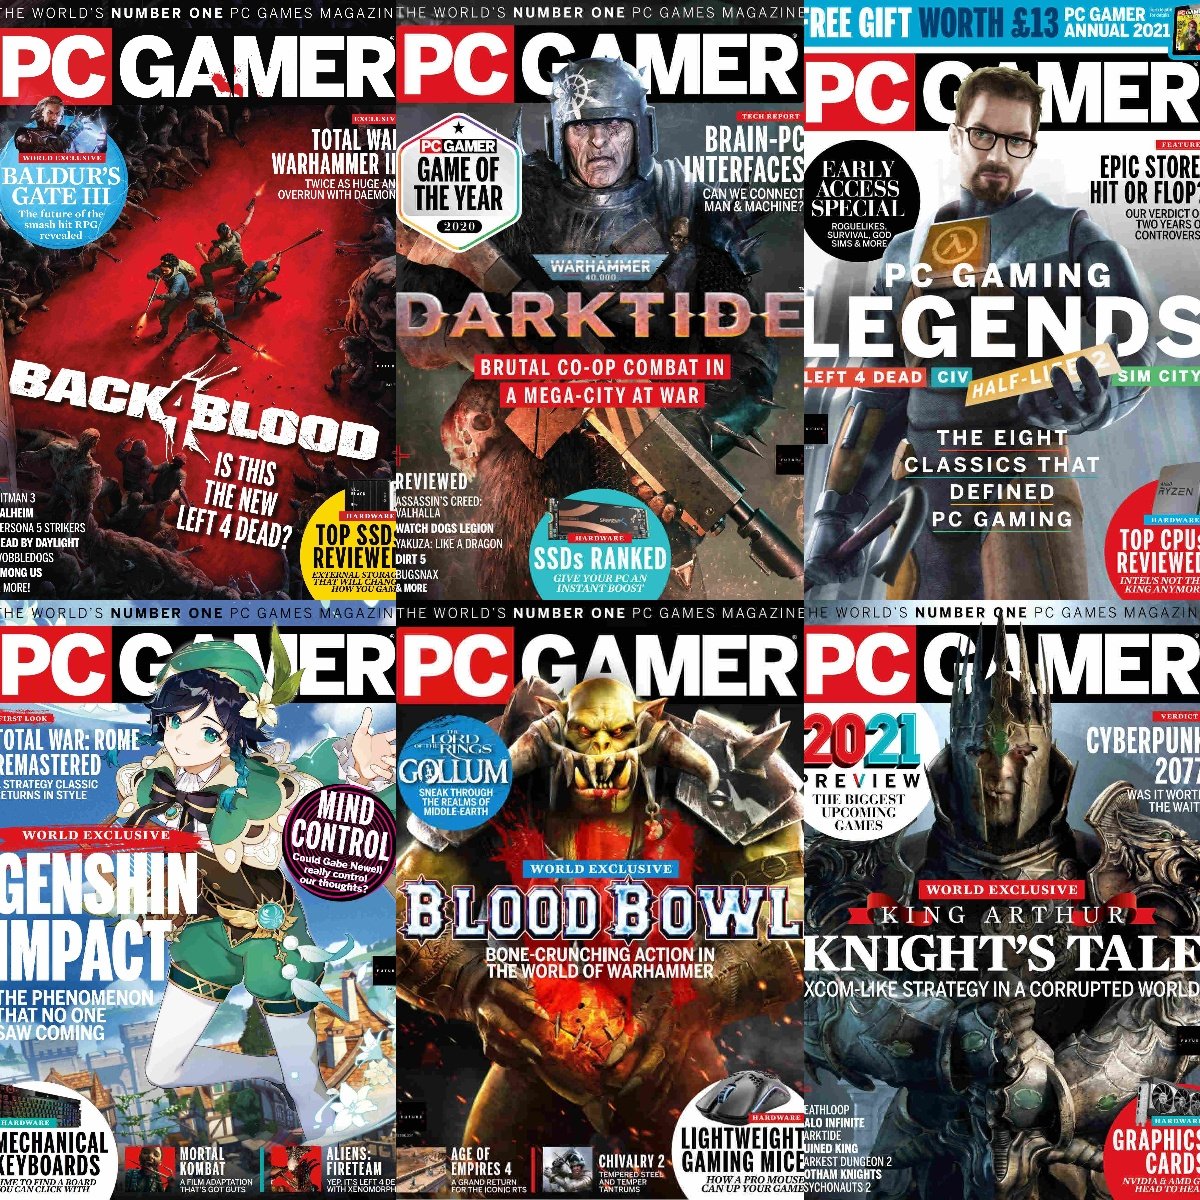 PC Gamer UK – Full Year 2021 Issues Collection